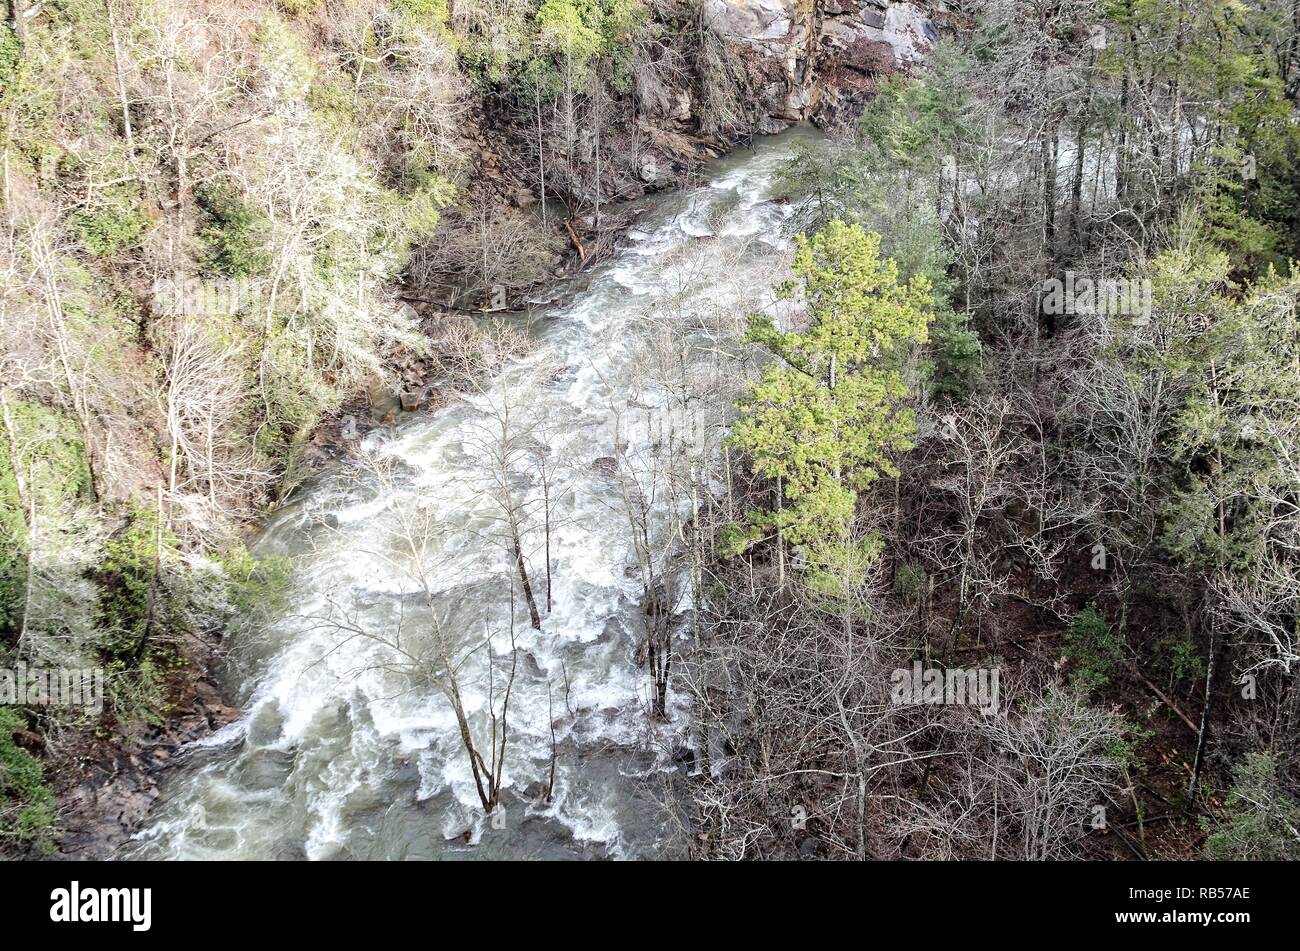 The Tallulah River in Georgia flowing swiftly through the gorge after a winter storm. Stock Photo